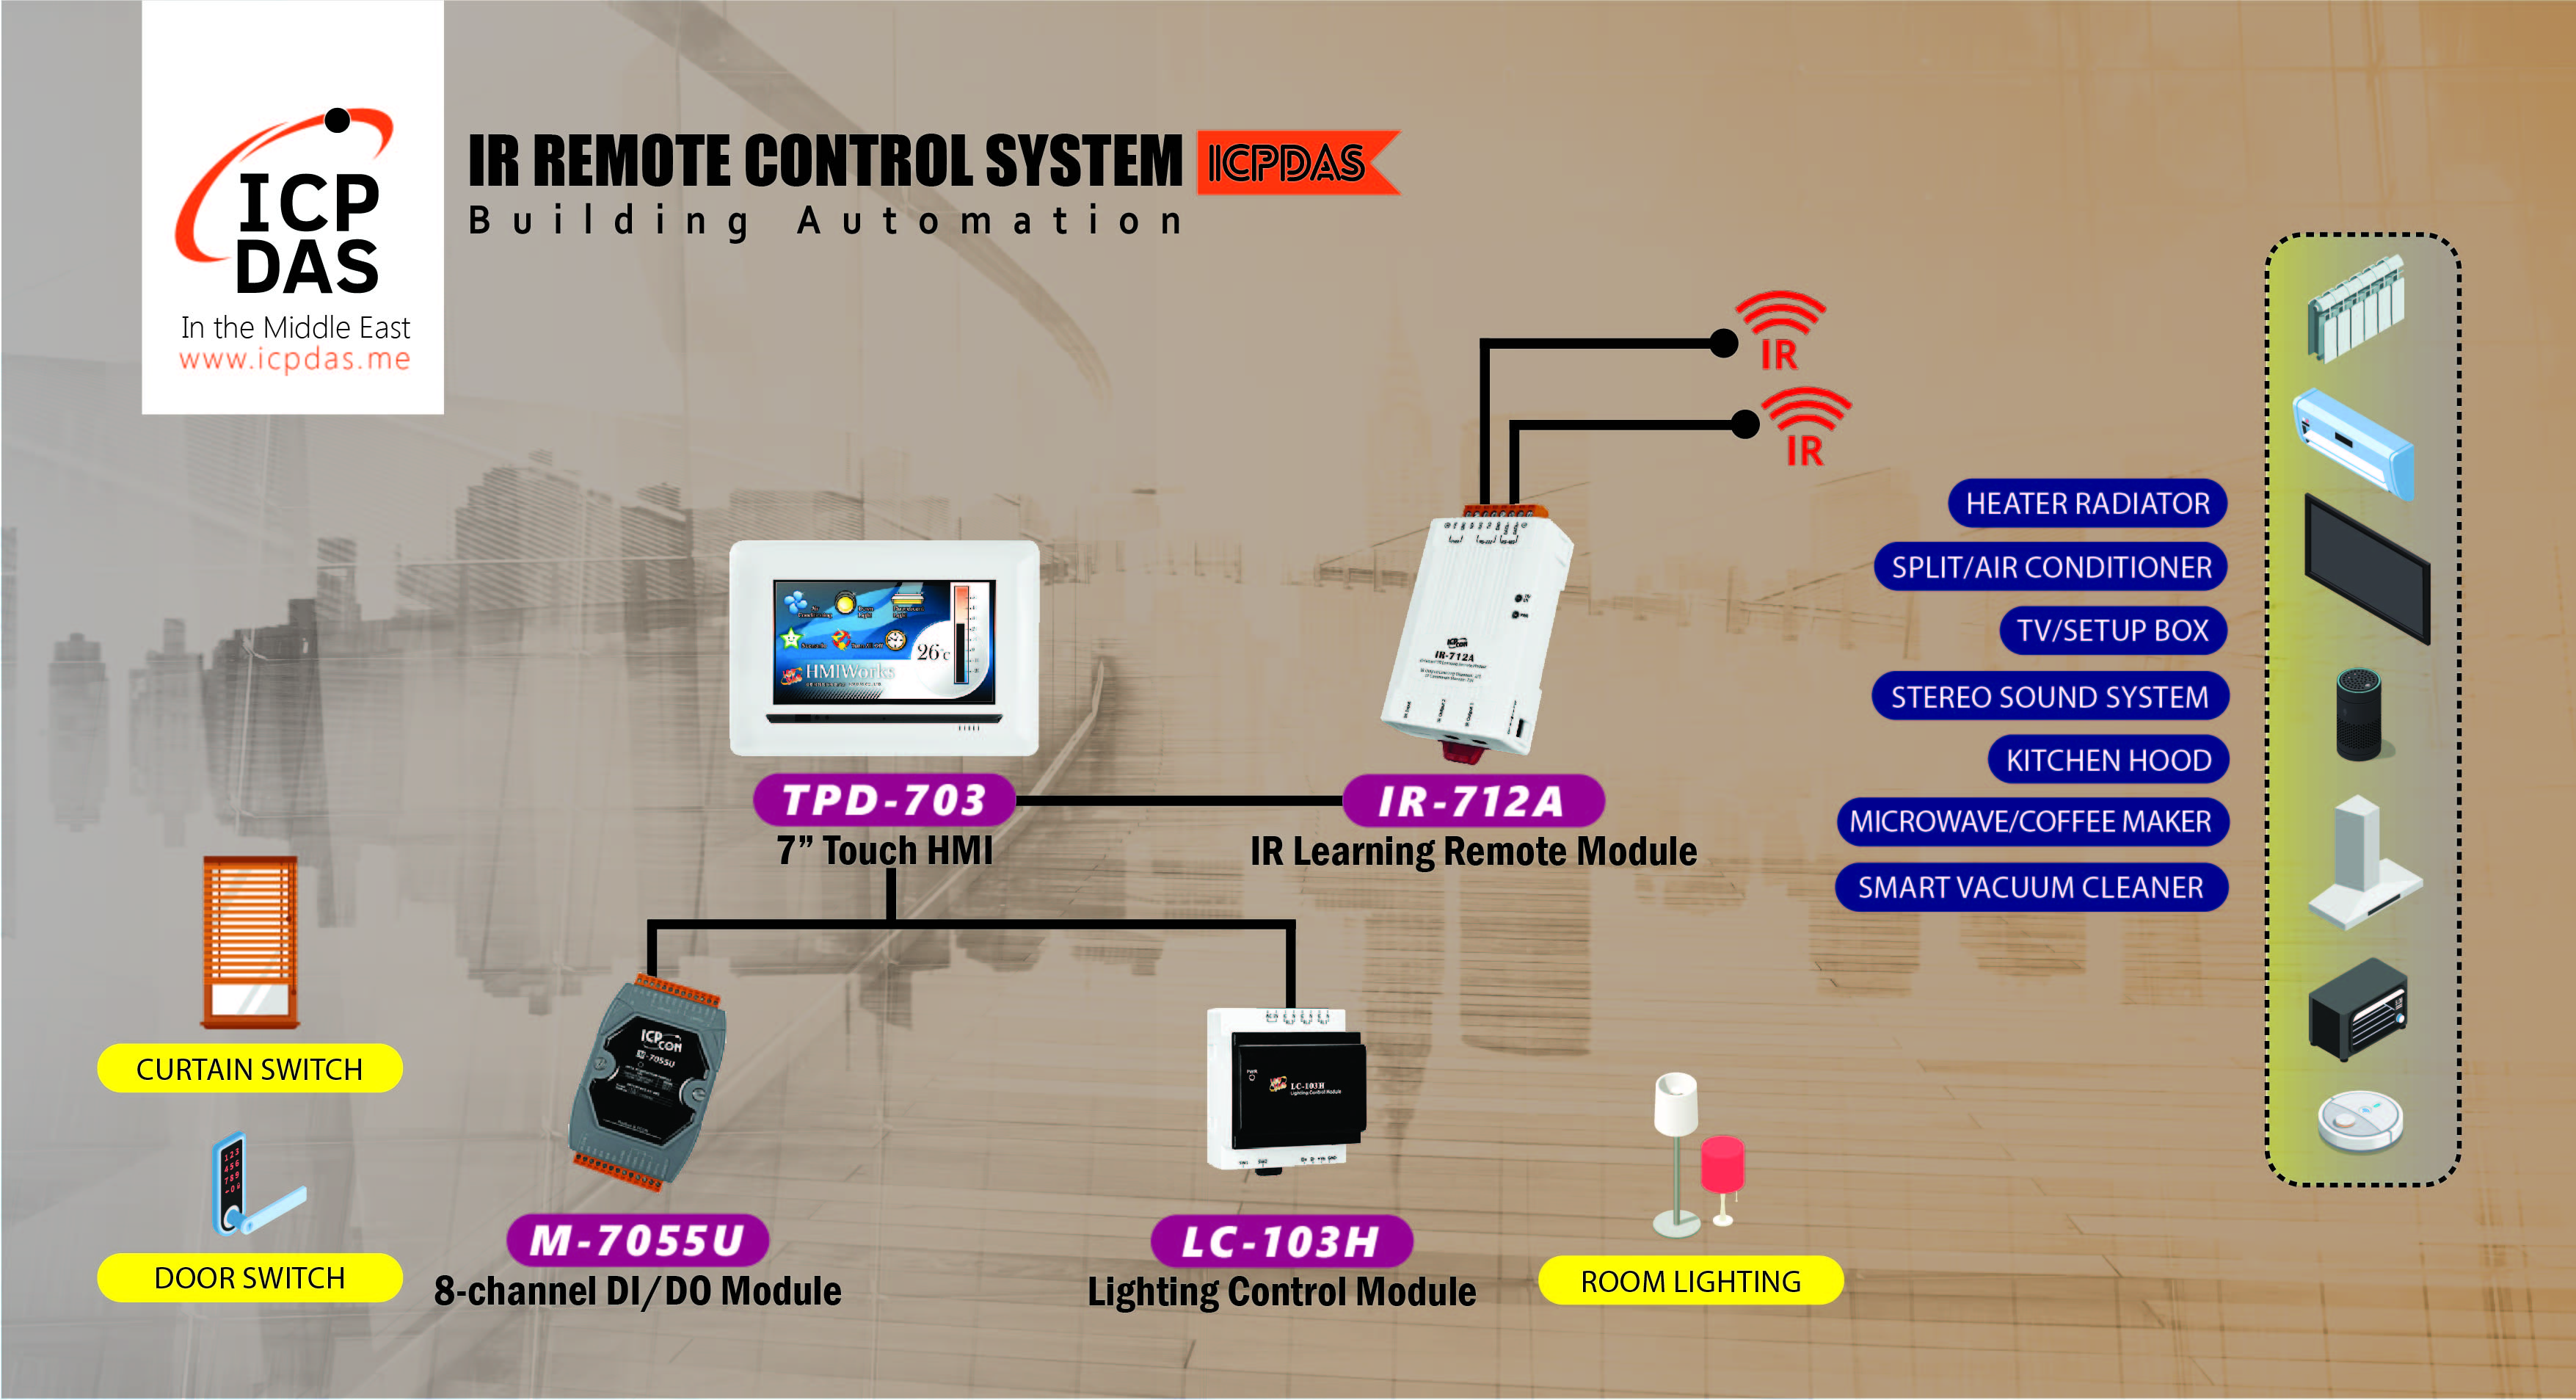 IR Remote Control System in Building Automation